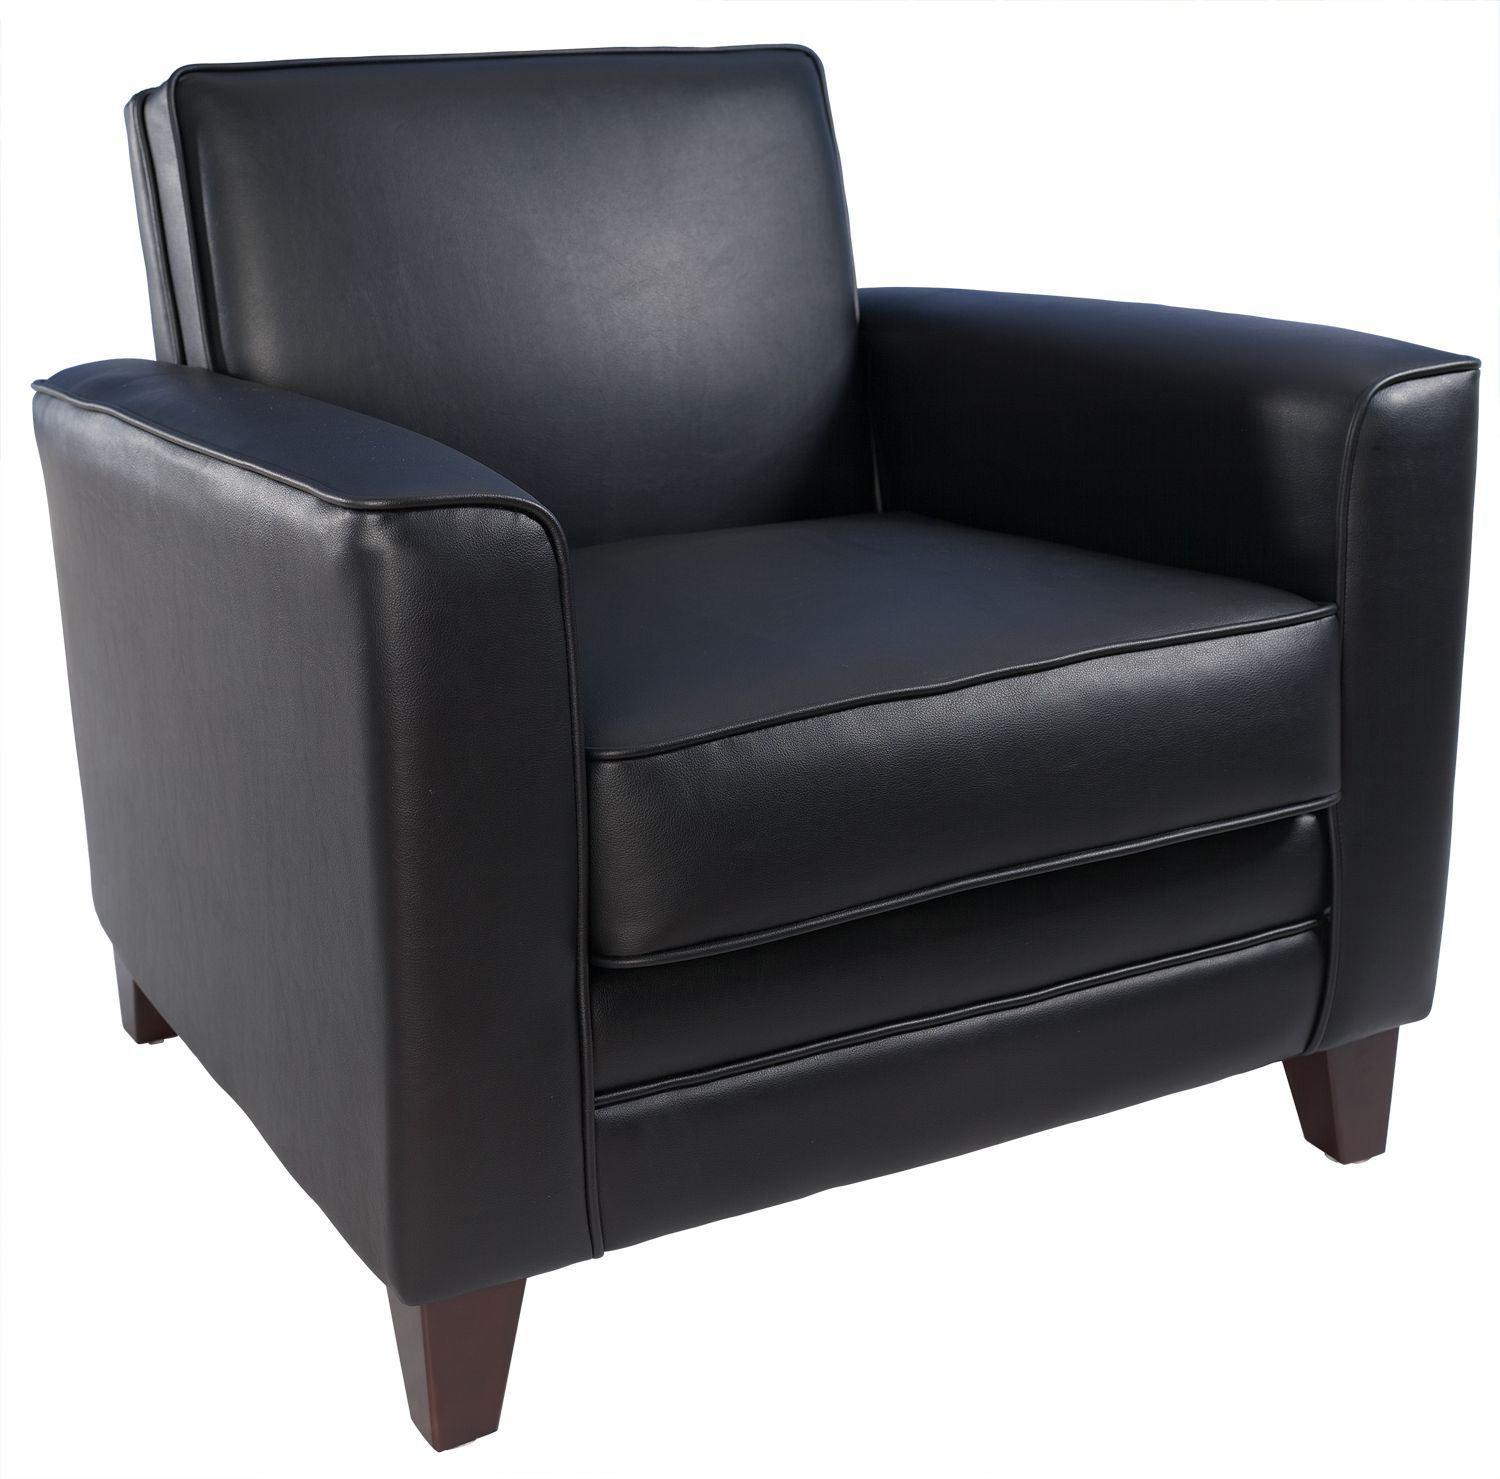 Newport leather chair - image 1